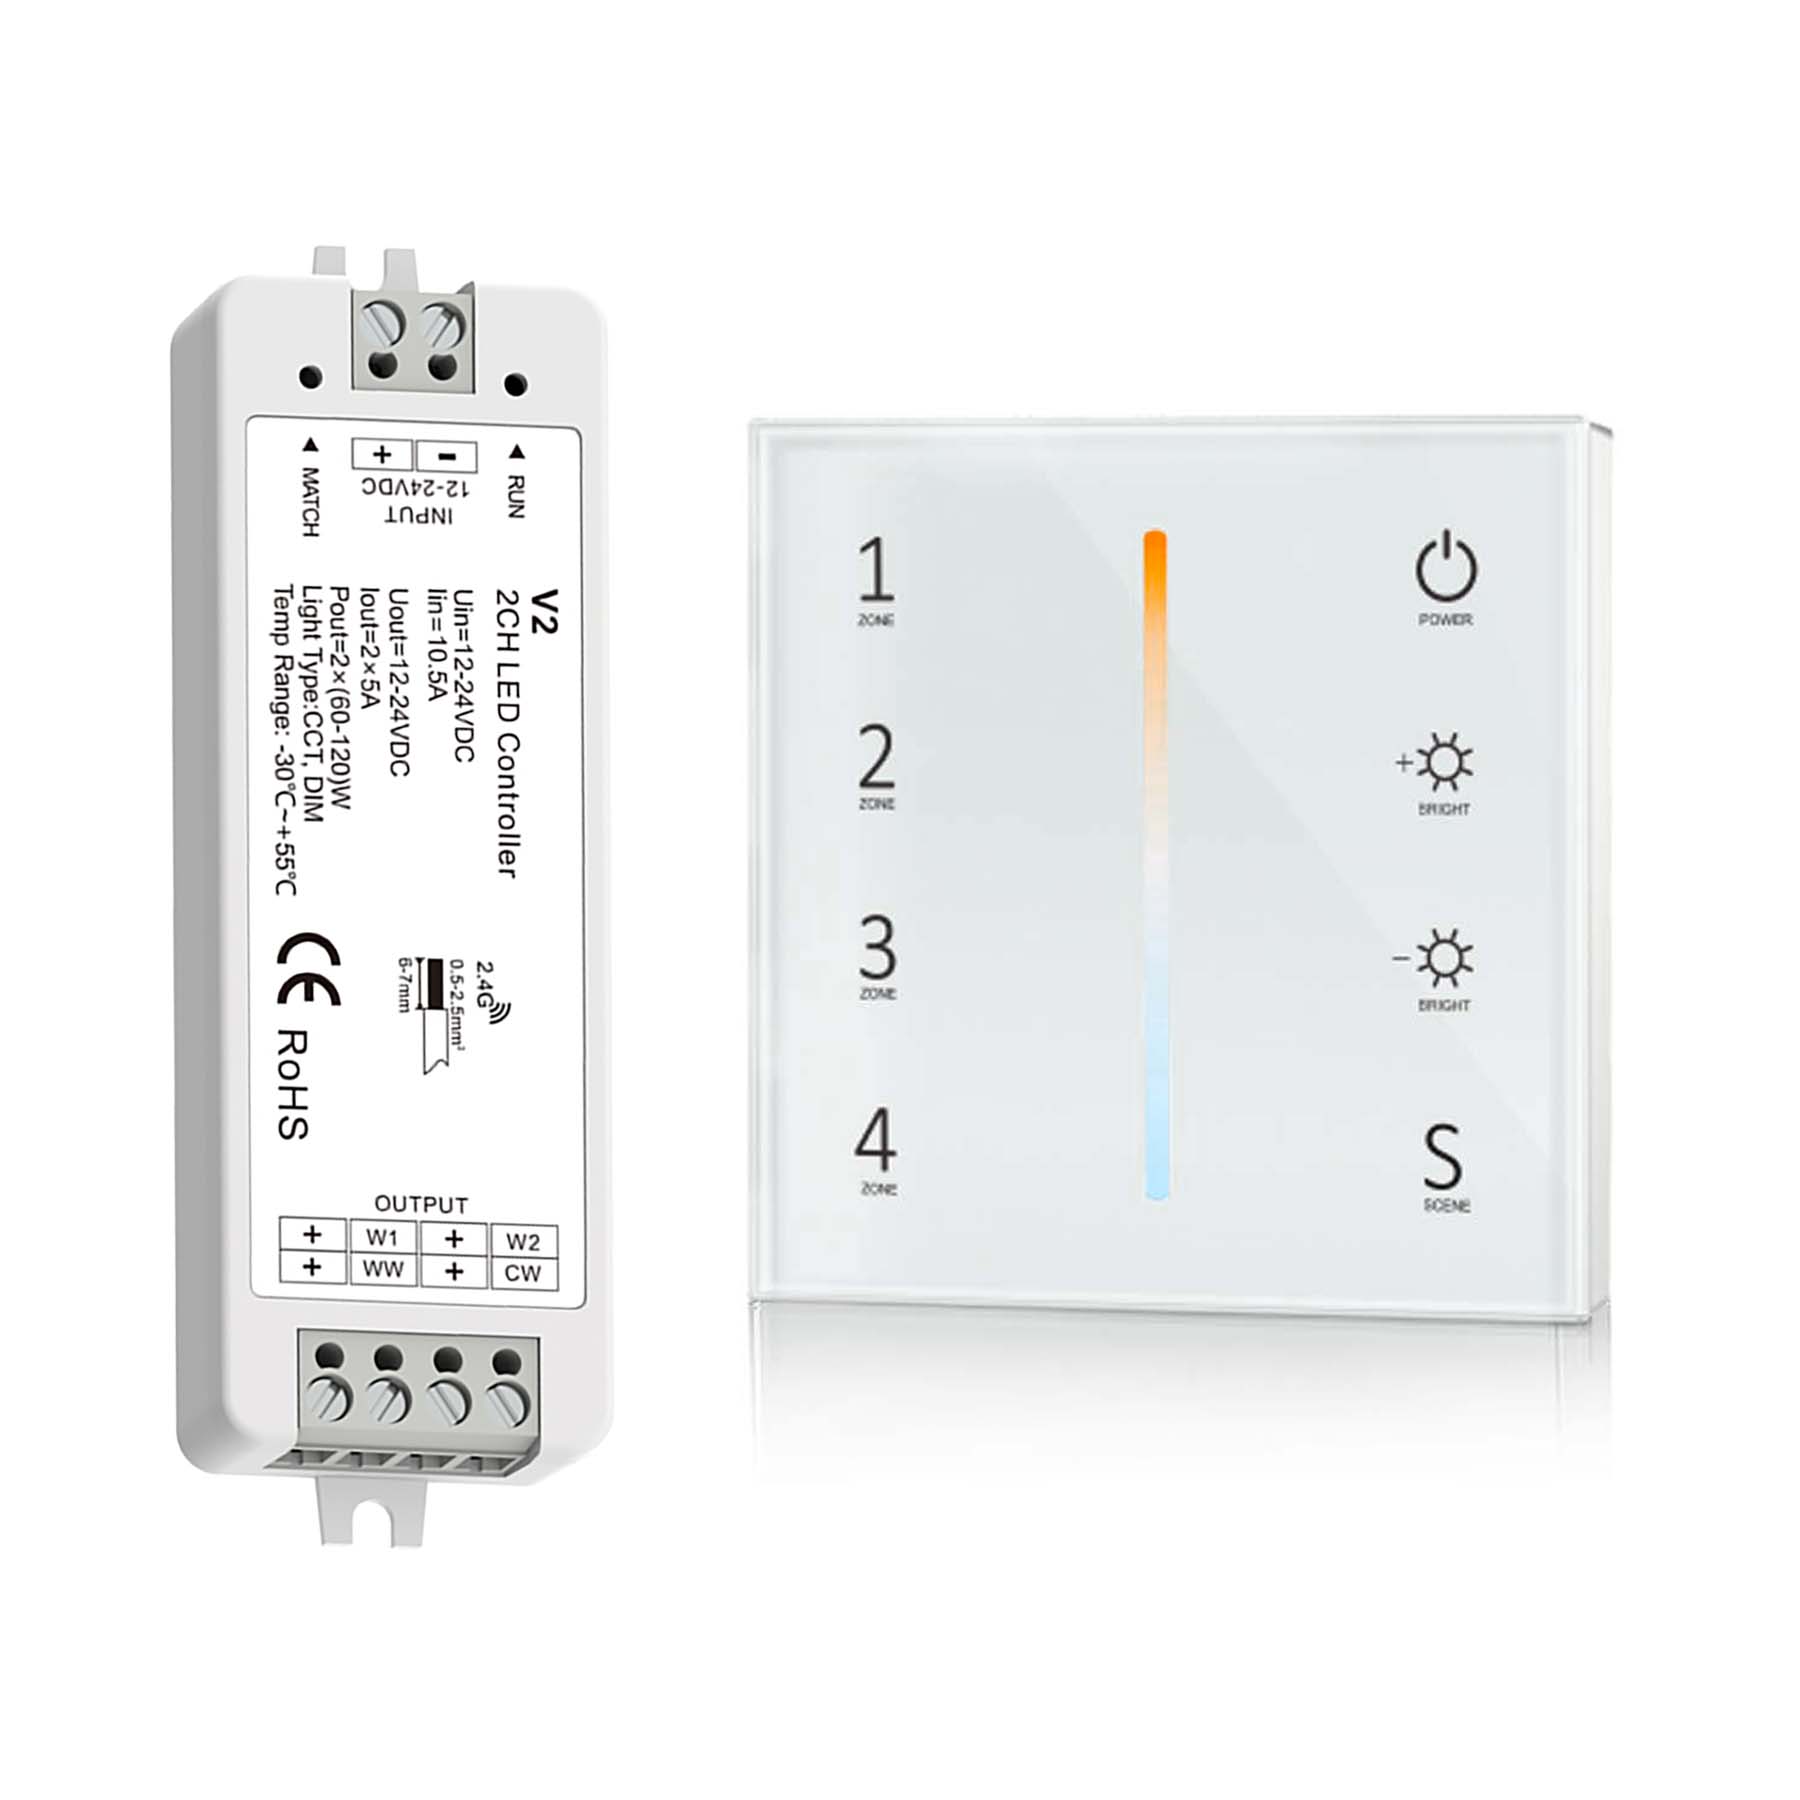 G.W.S. LED White LED 12-24V DC CCT Controller V2 + 4 Zone Panel Remote Control 2*AAA Battery T22